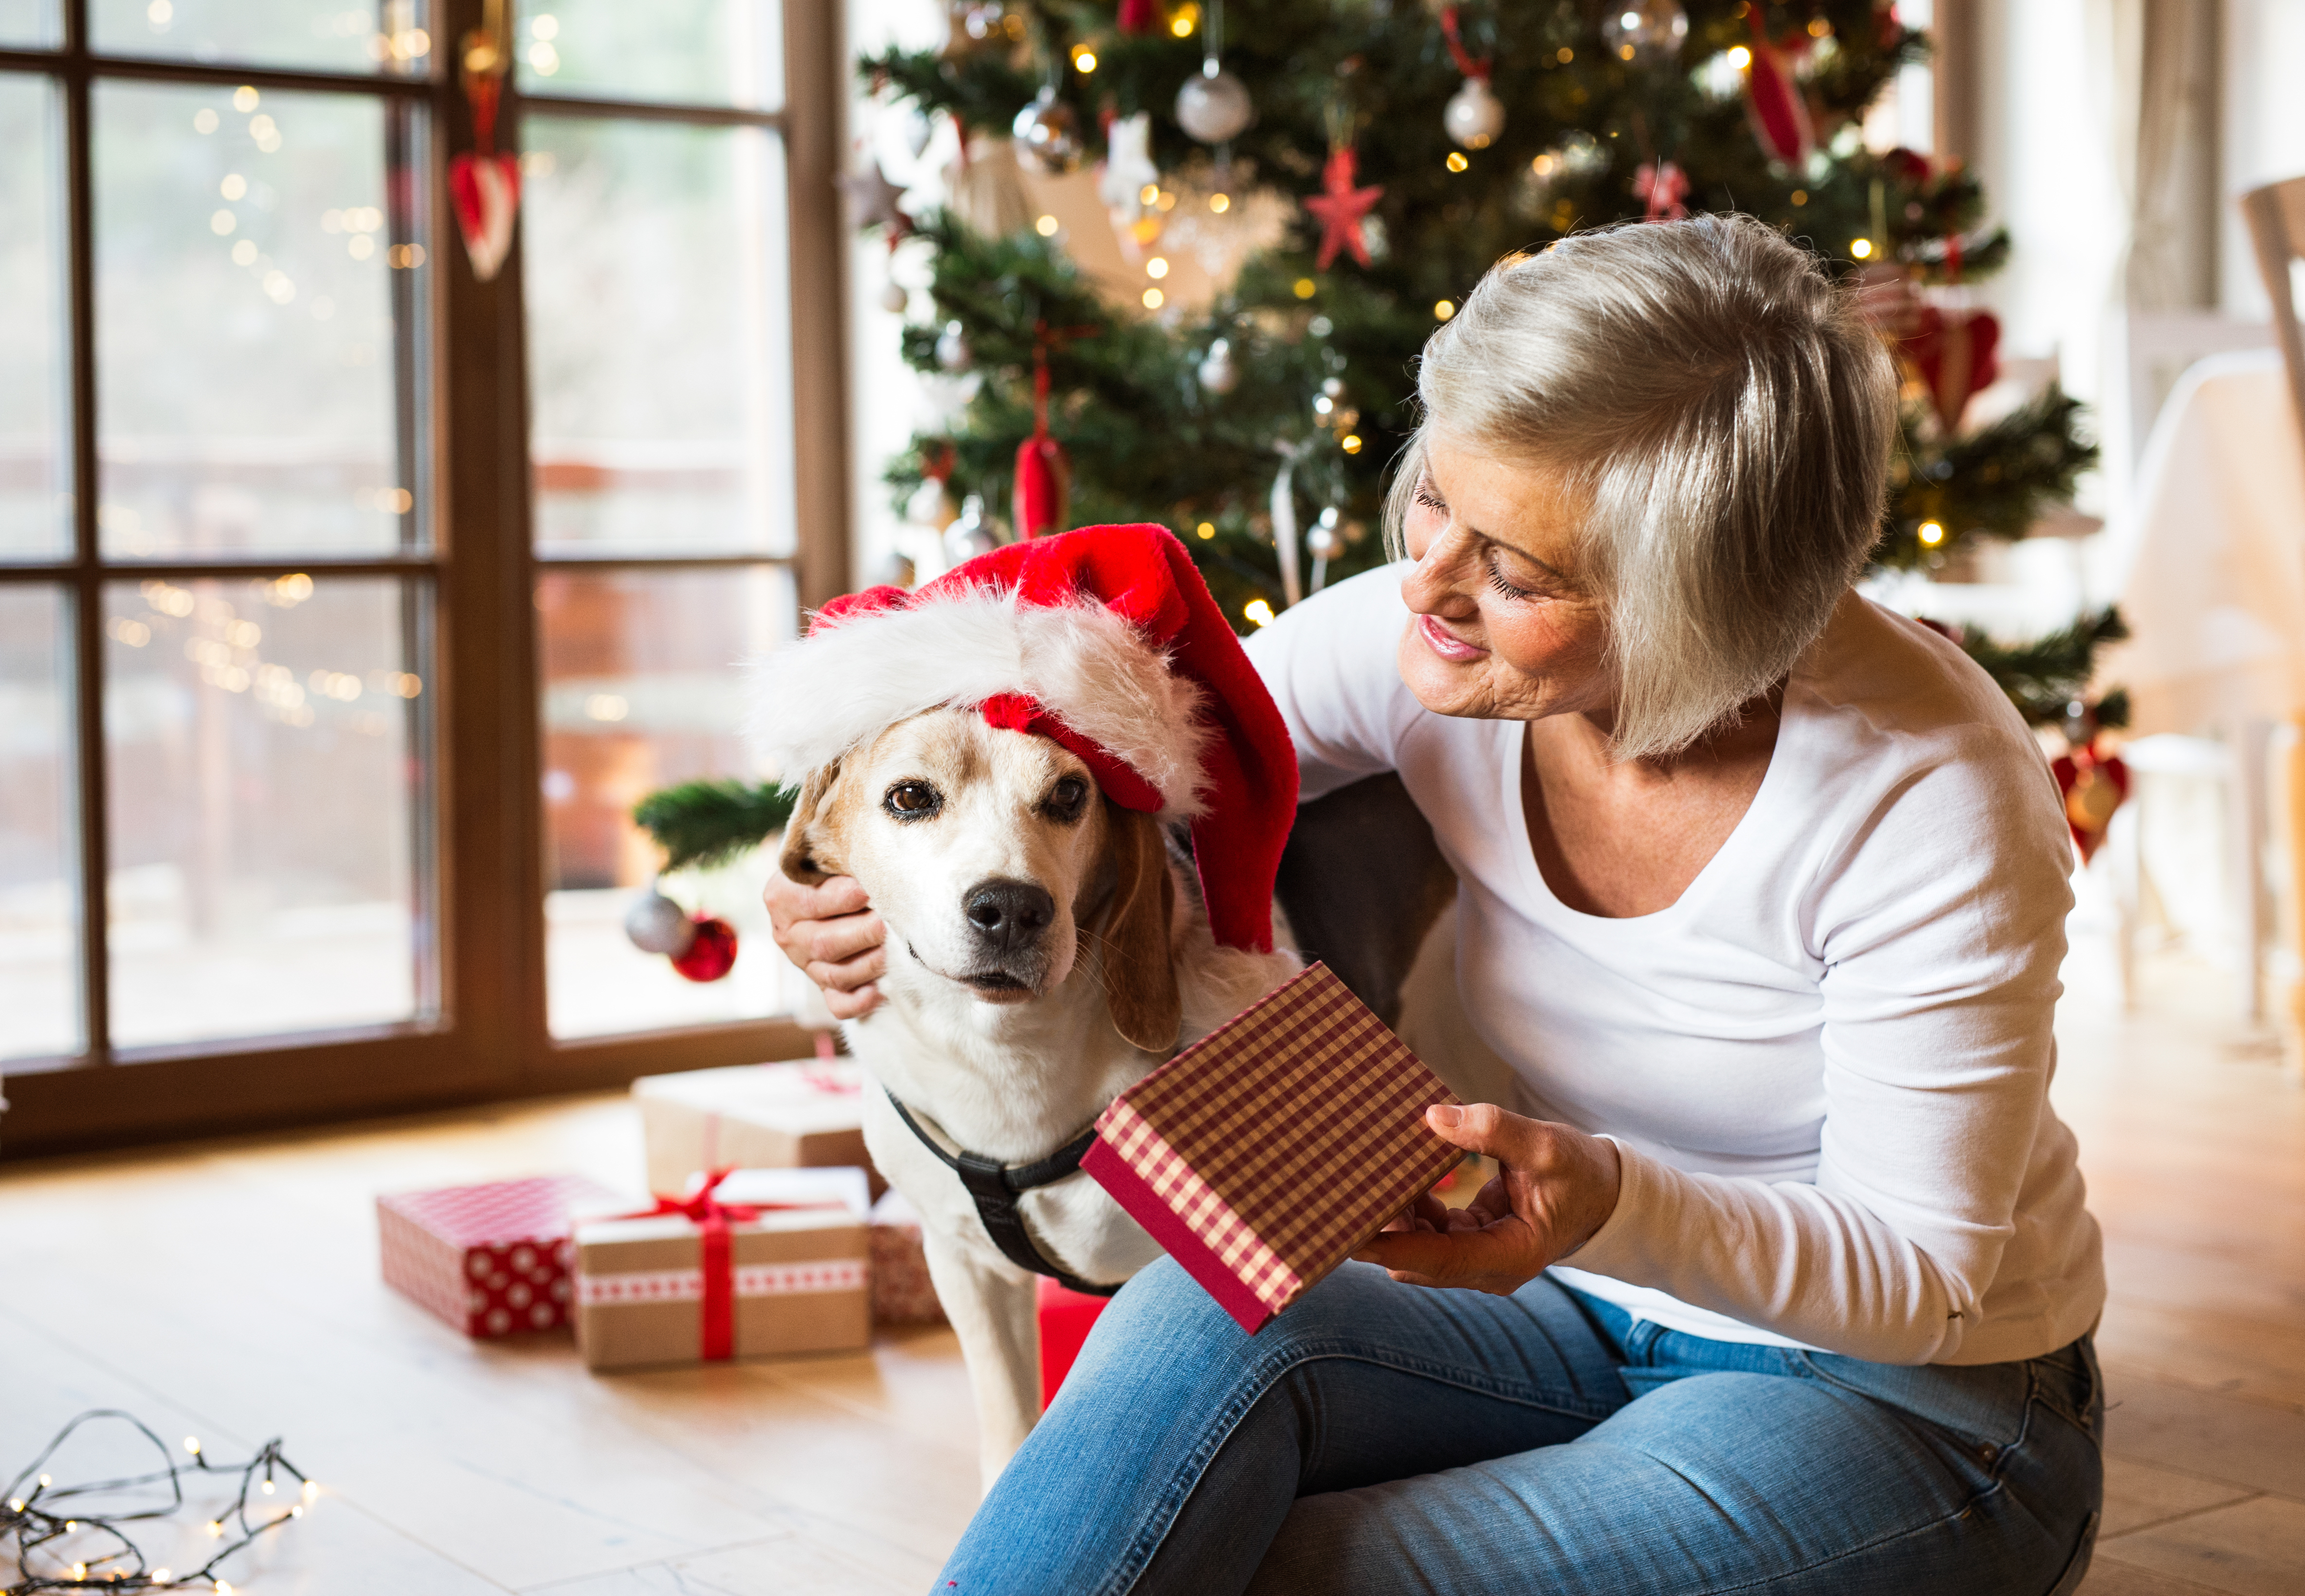 A senior beagle wearing a Santa hat opens gifts with his owner